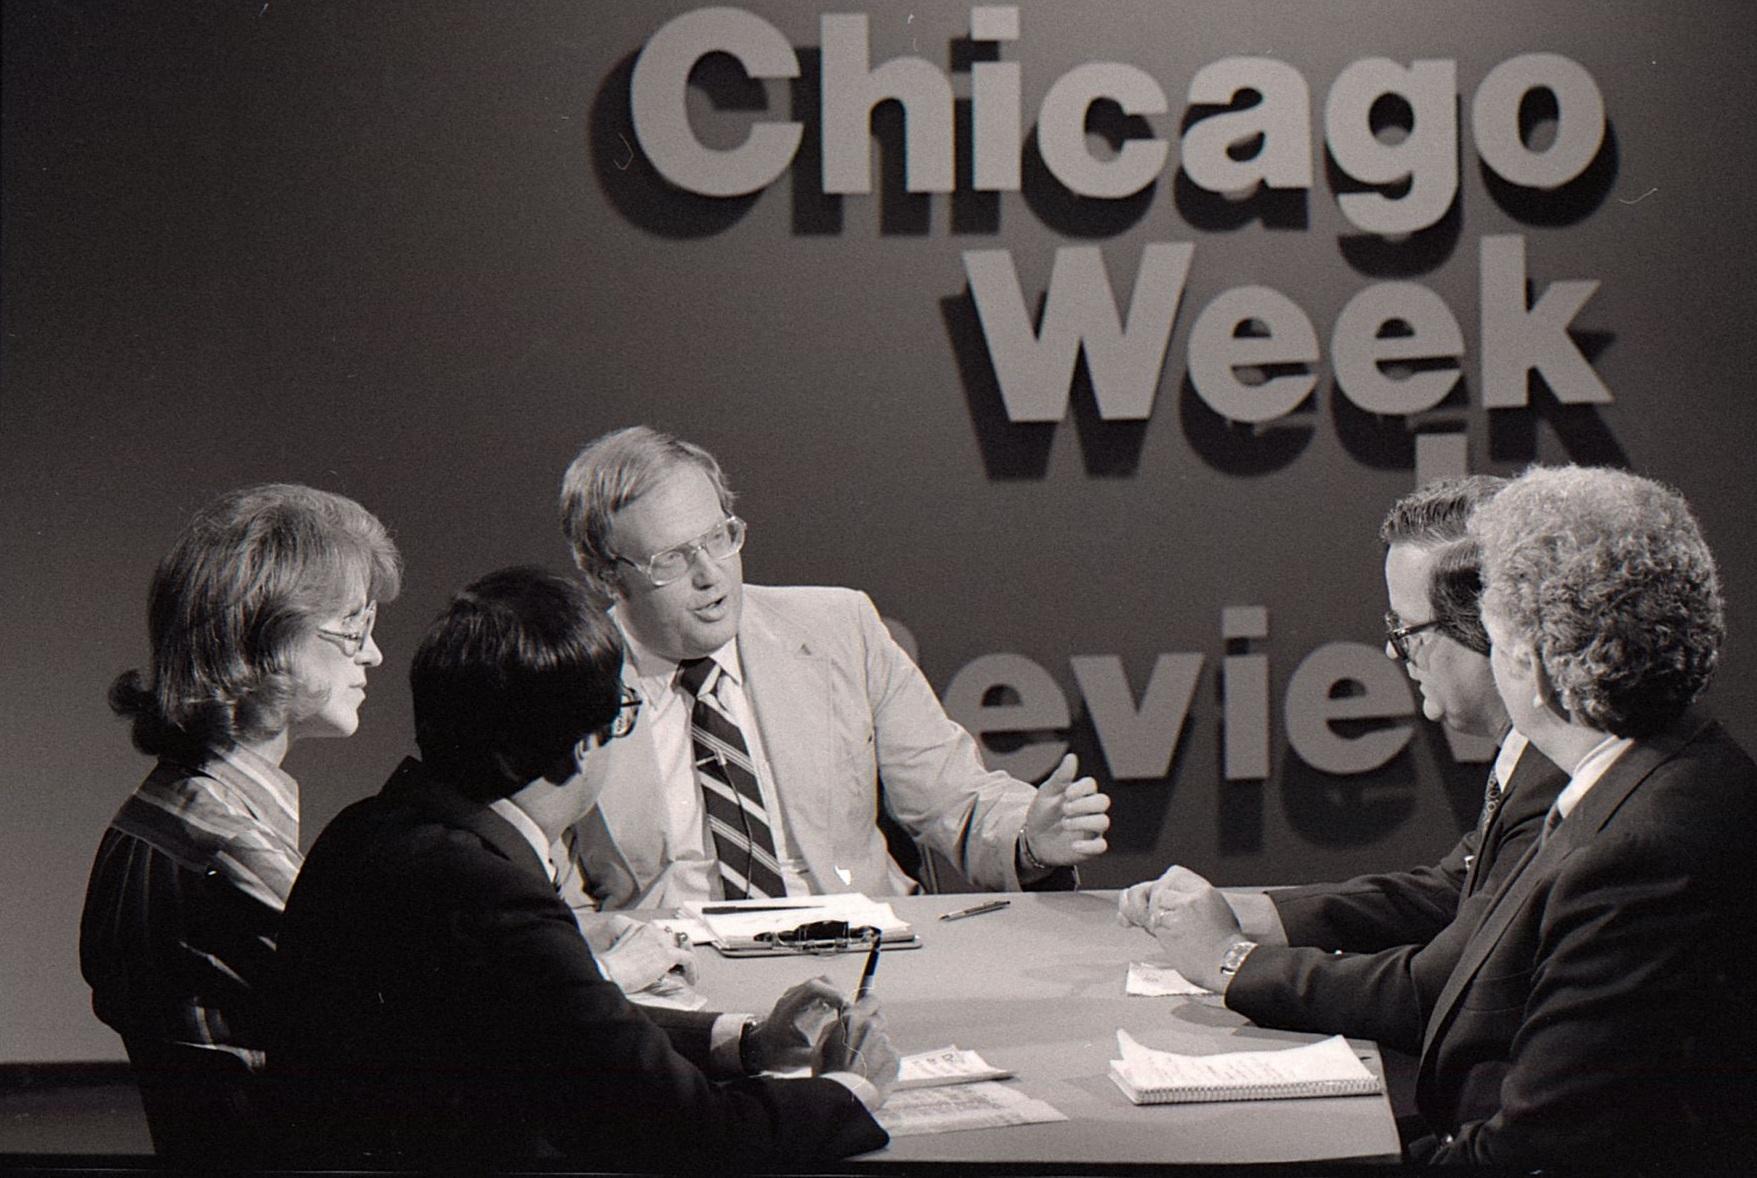 “Chicago Week in Review,” 1980 (WTTW)